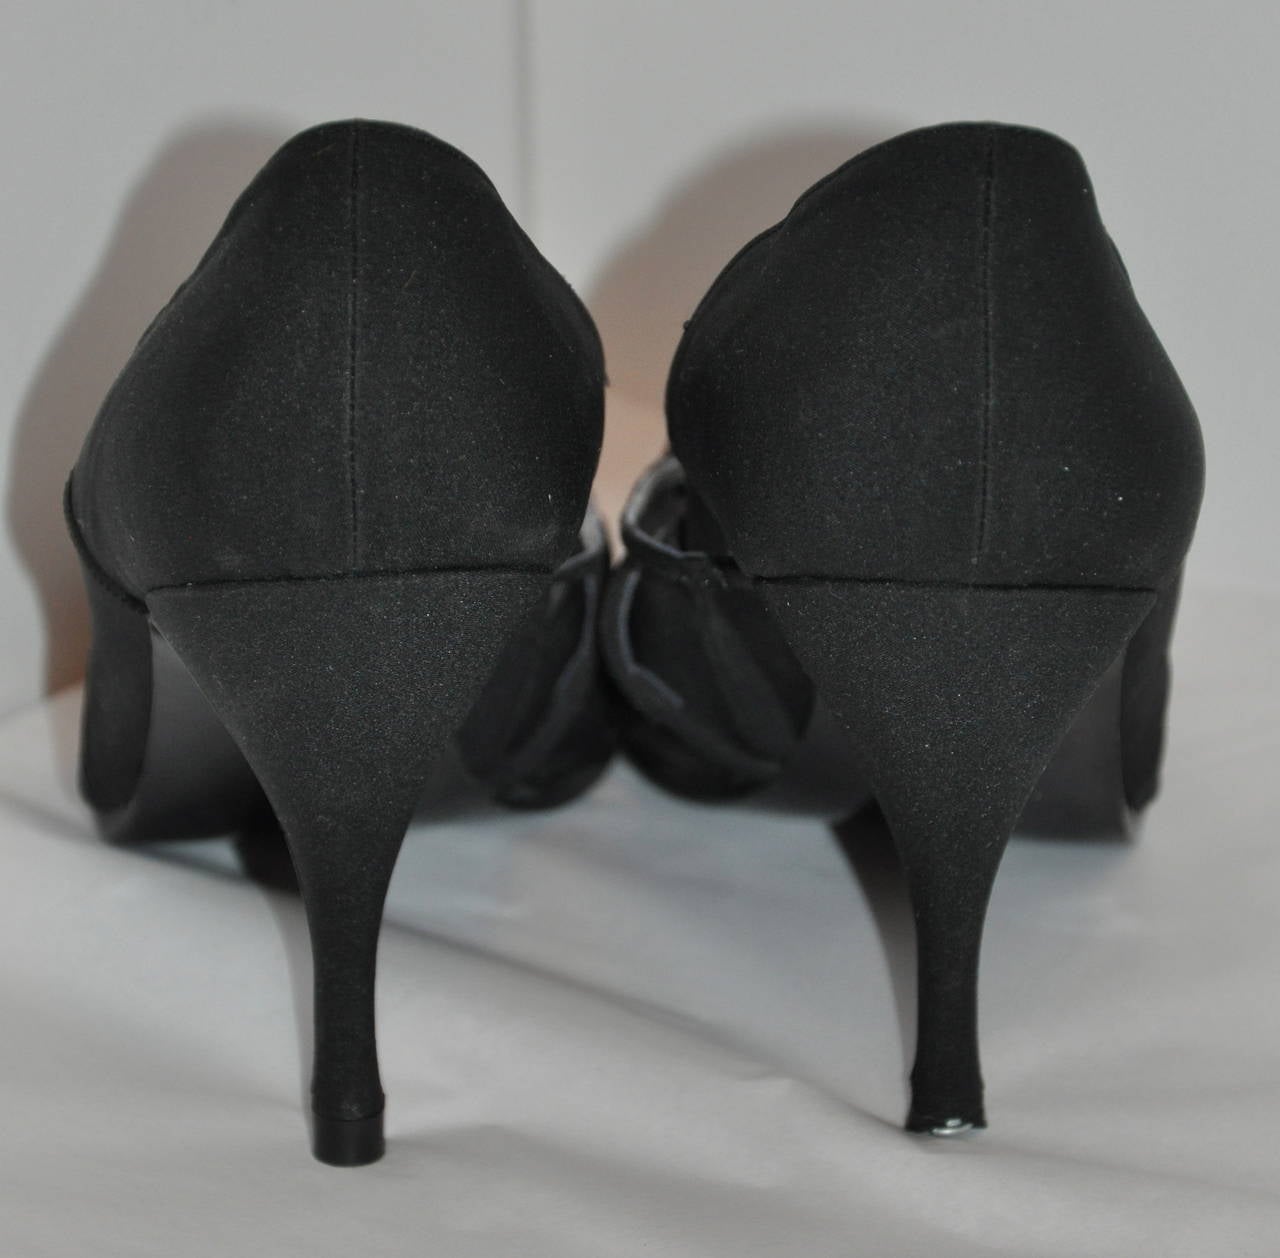 Susan Bennis Warren Edwards hand-made black silk satin evening pumps are sized 38.5/Italy, 8 1/2/American.
   Heels measures 3.75 in height.